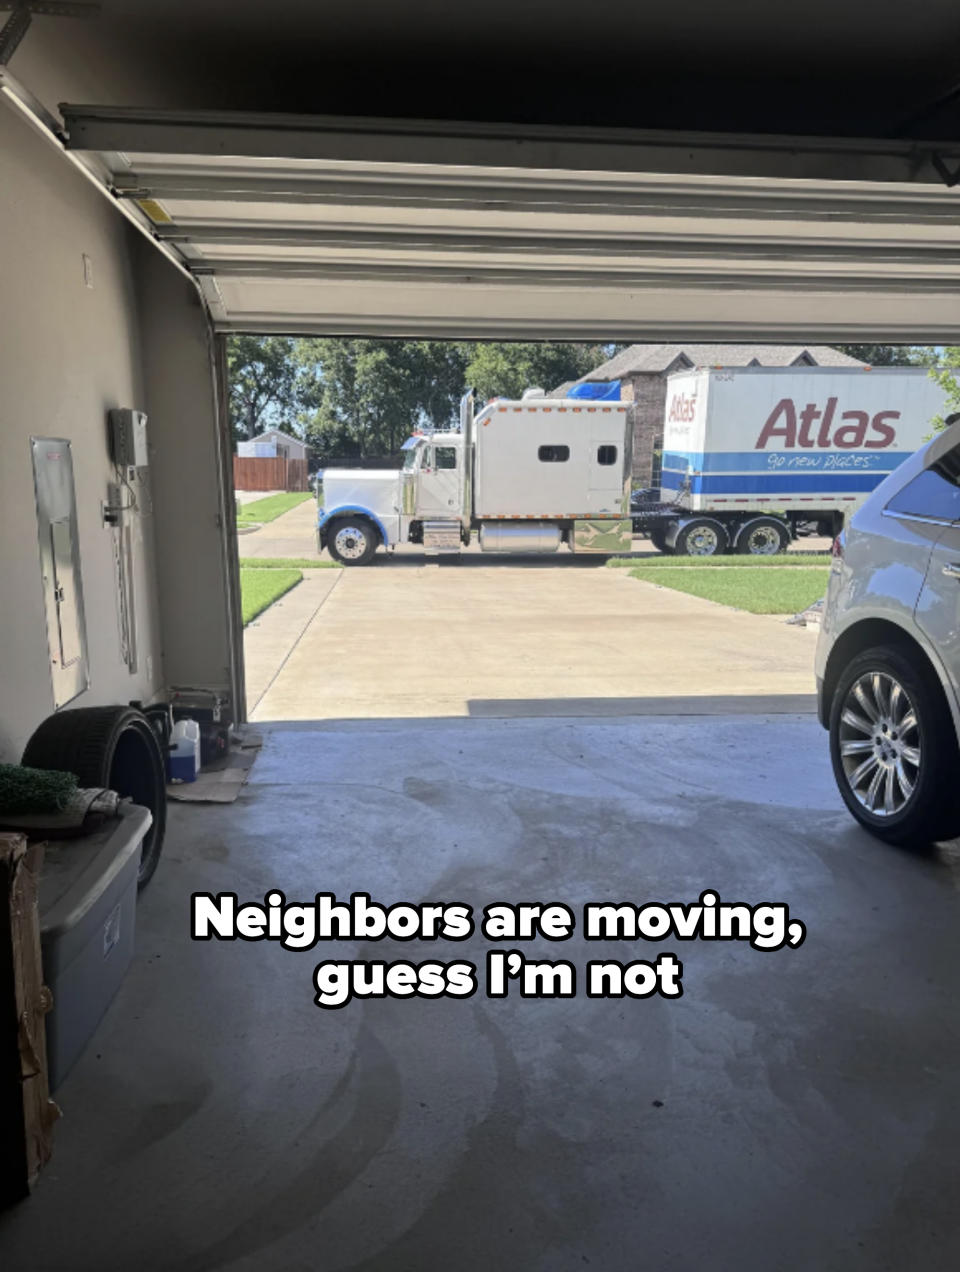 View from inside a garage looking out to a driveway where a moving truck labeled "Atlas" is parked